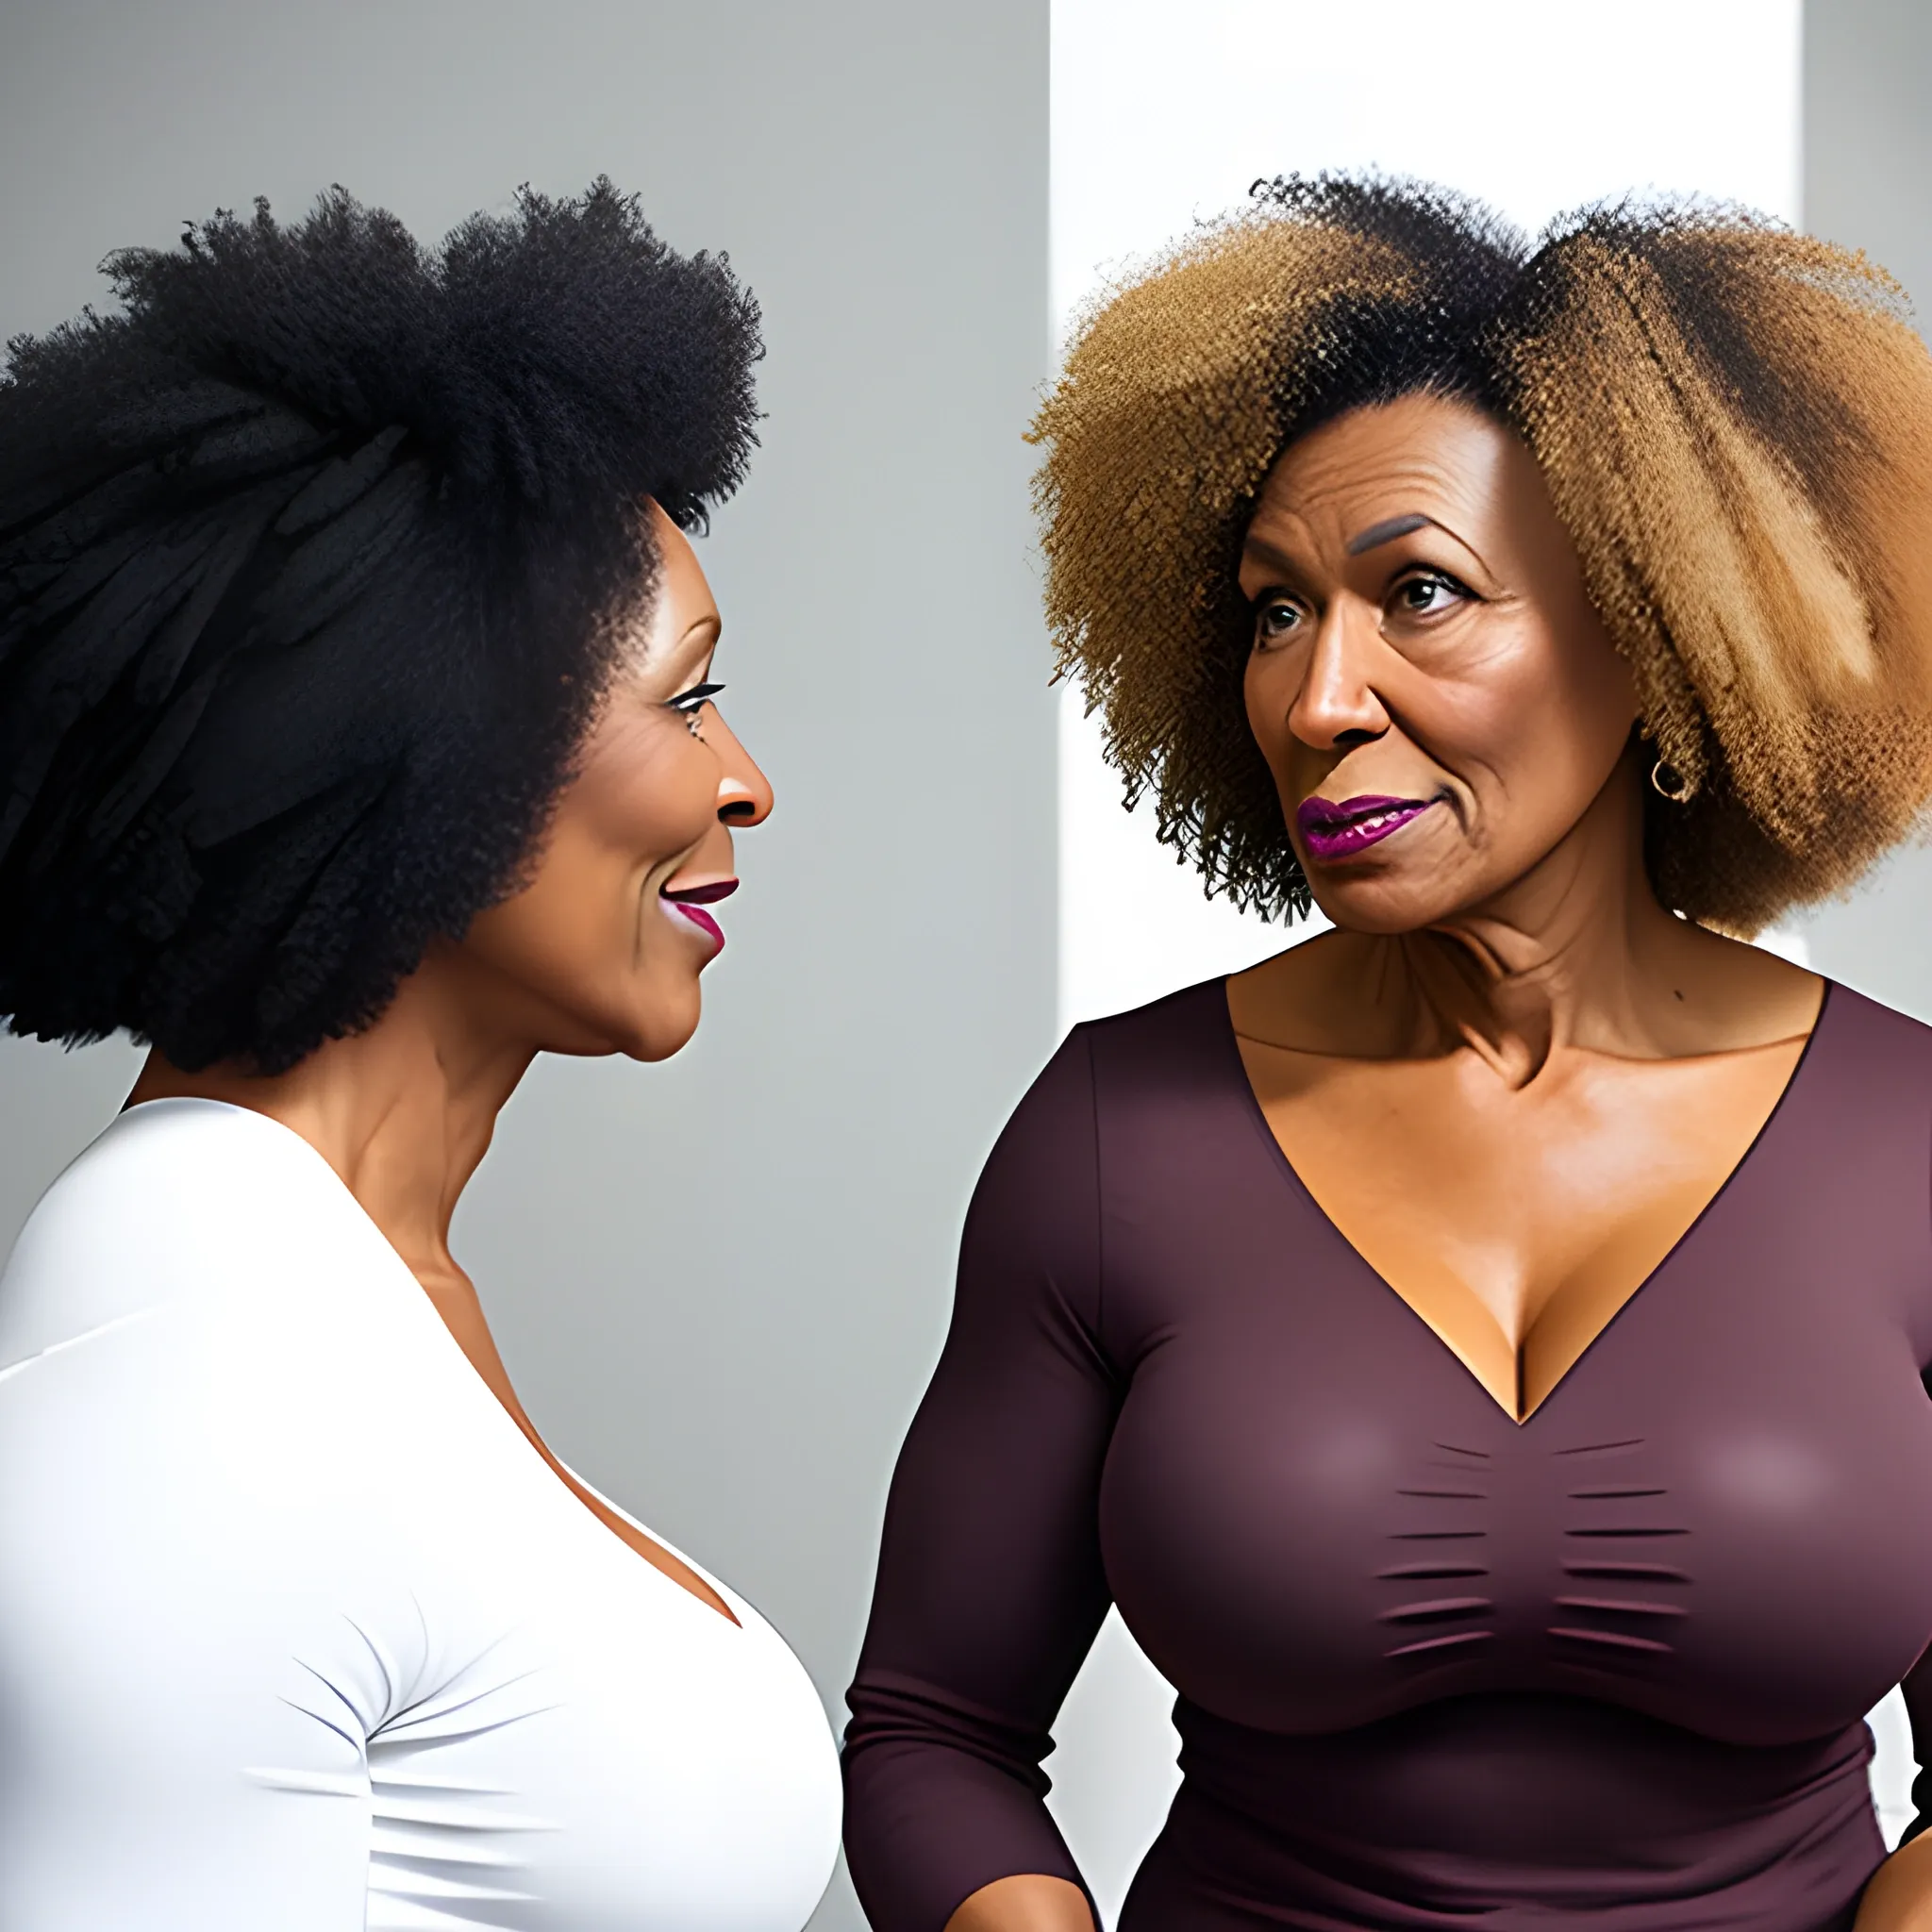 black muscular older woman talking with small tiny white woma 